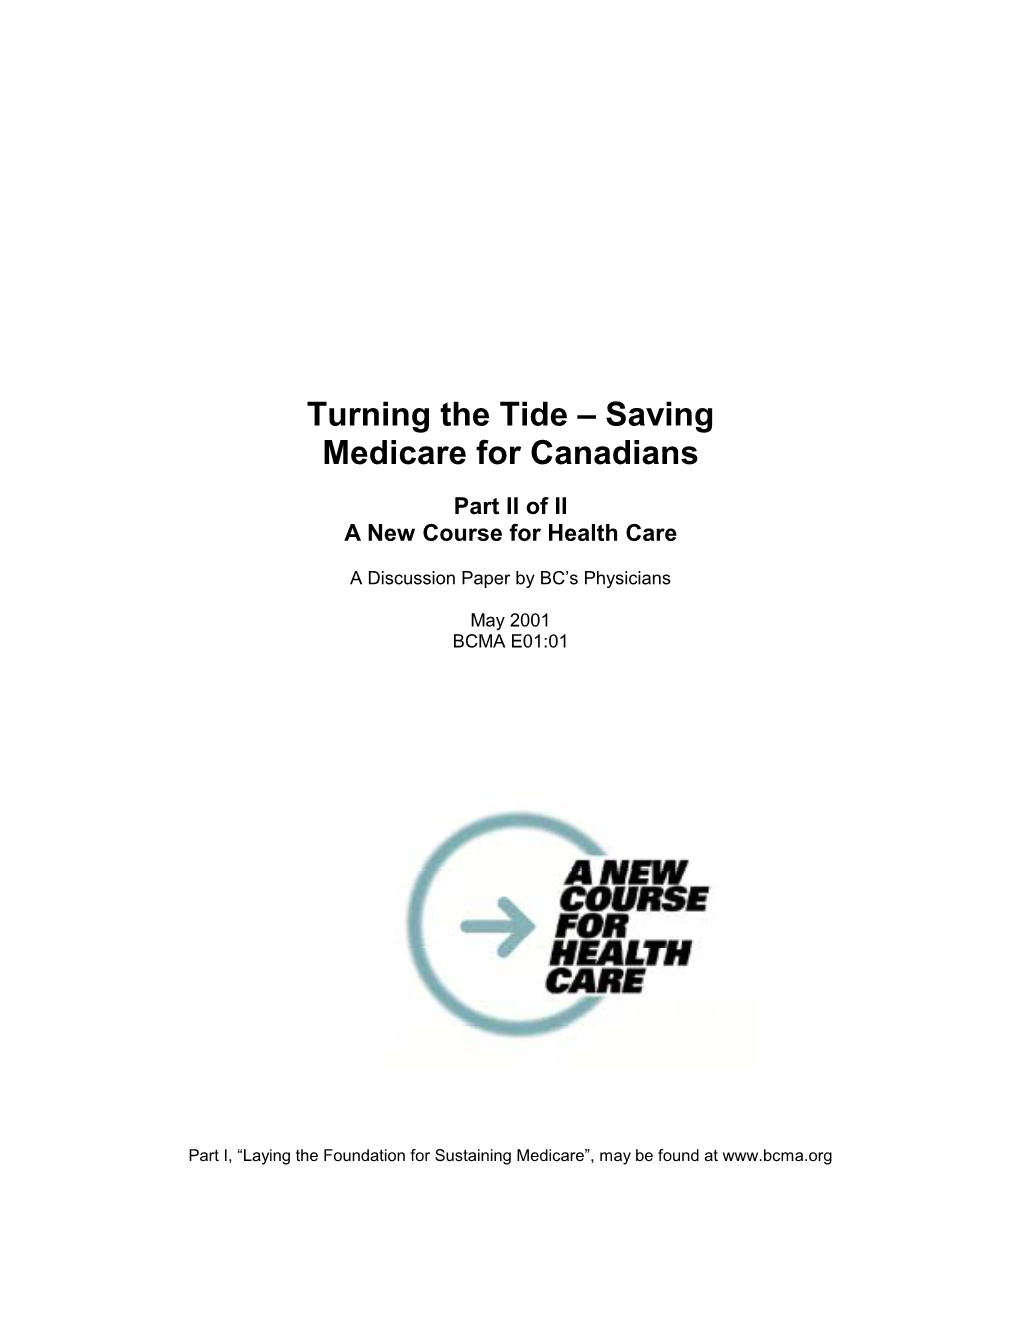 Turning the Tide – Saving Medicare for Canadians